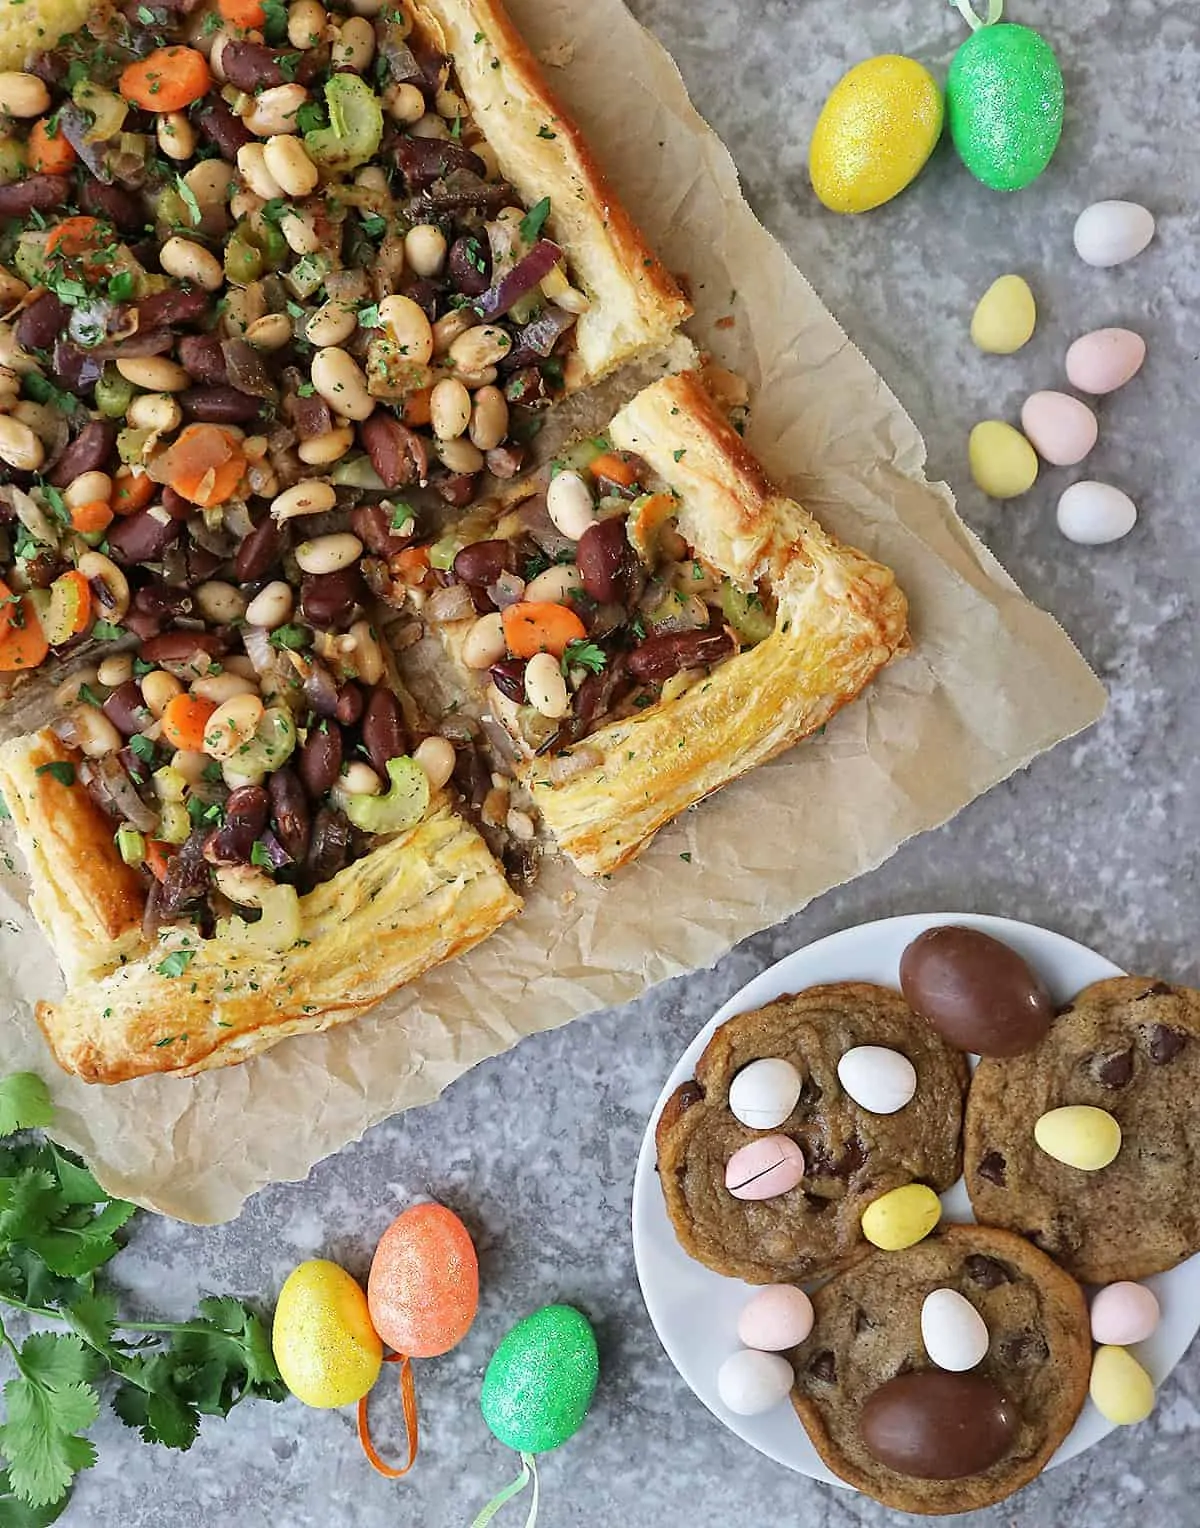 This super simple bean tart is made with puff pastry, canned beans, and a handful of other ingredients from your pantry. Serve it up for a tasty weeknight dinner or for your stay-at-home Easter meal.